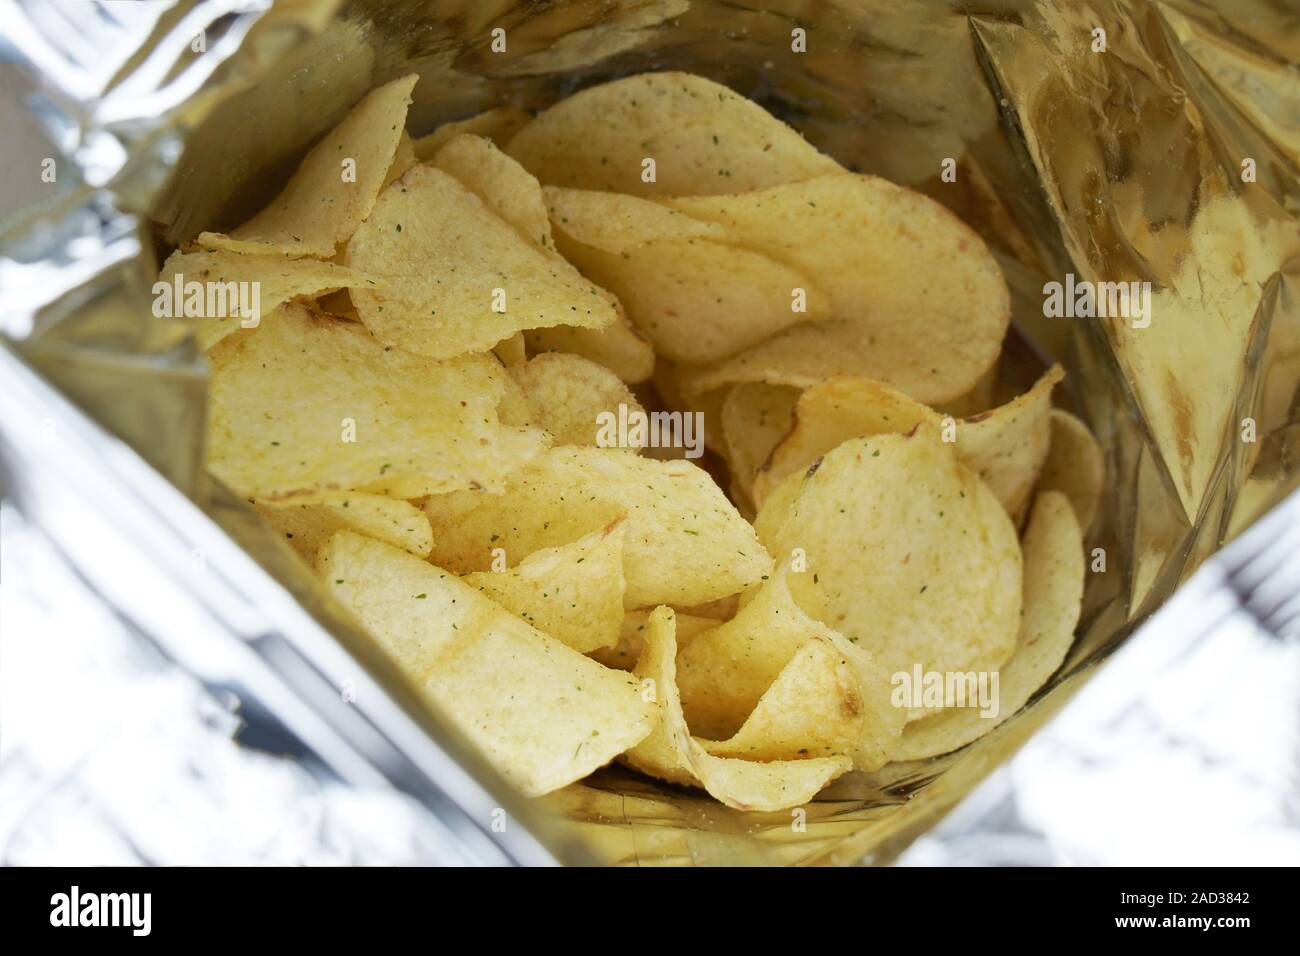 close-up look inside a bag of potato chips or packet of crisps, cheese and onion flavor Stock Photo